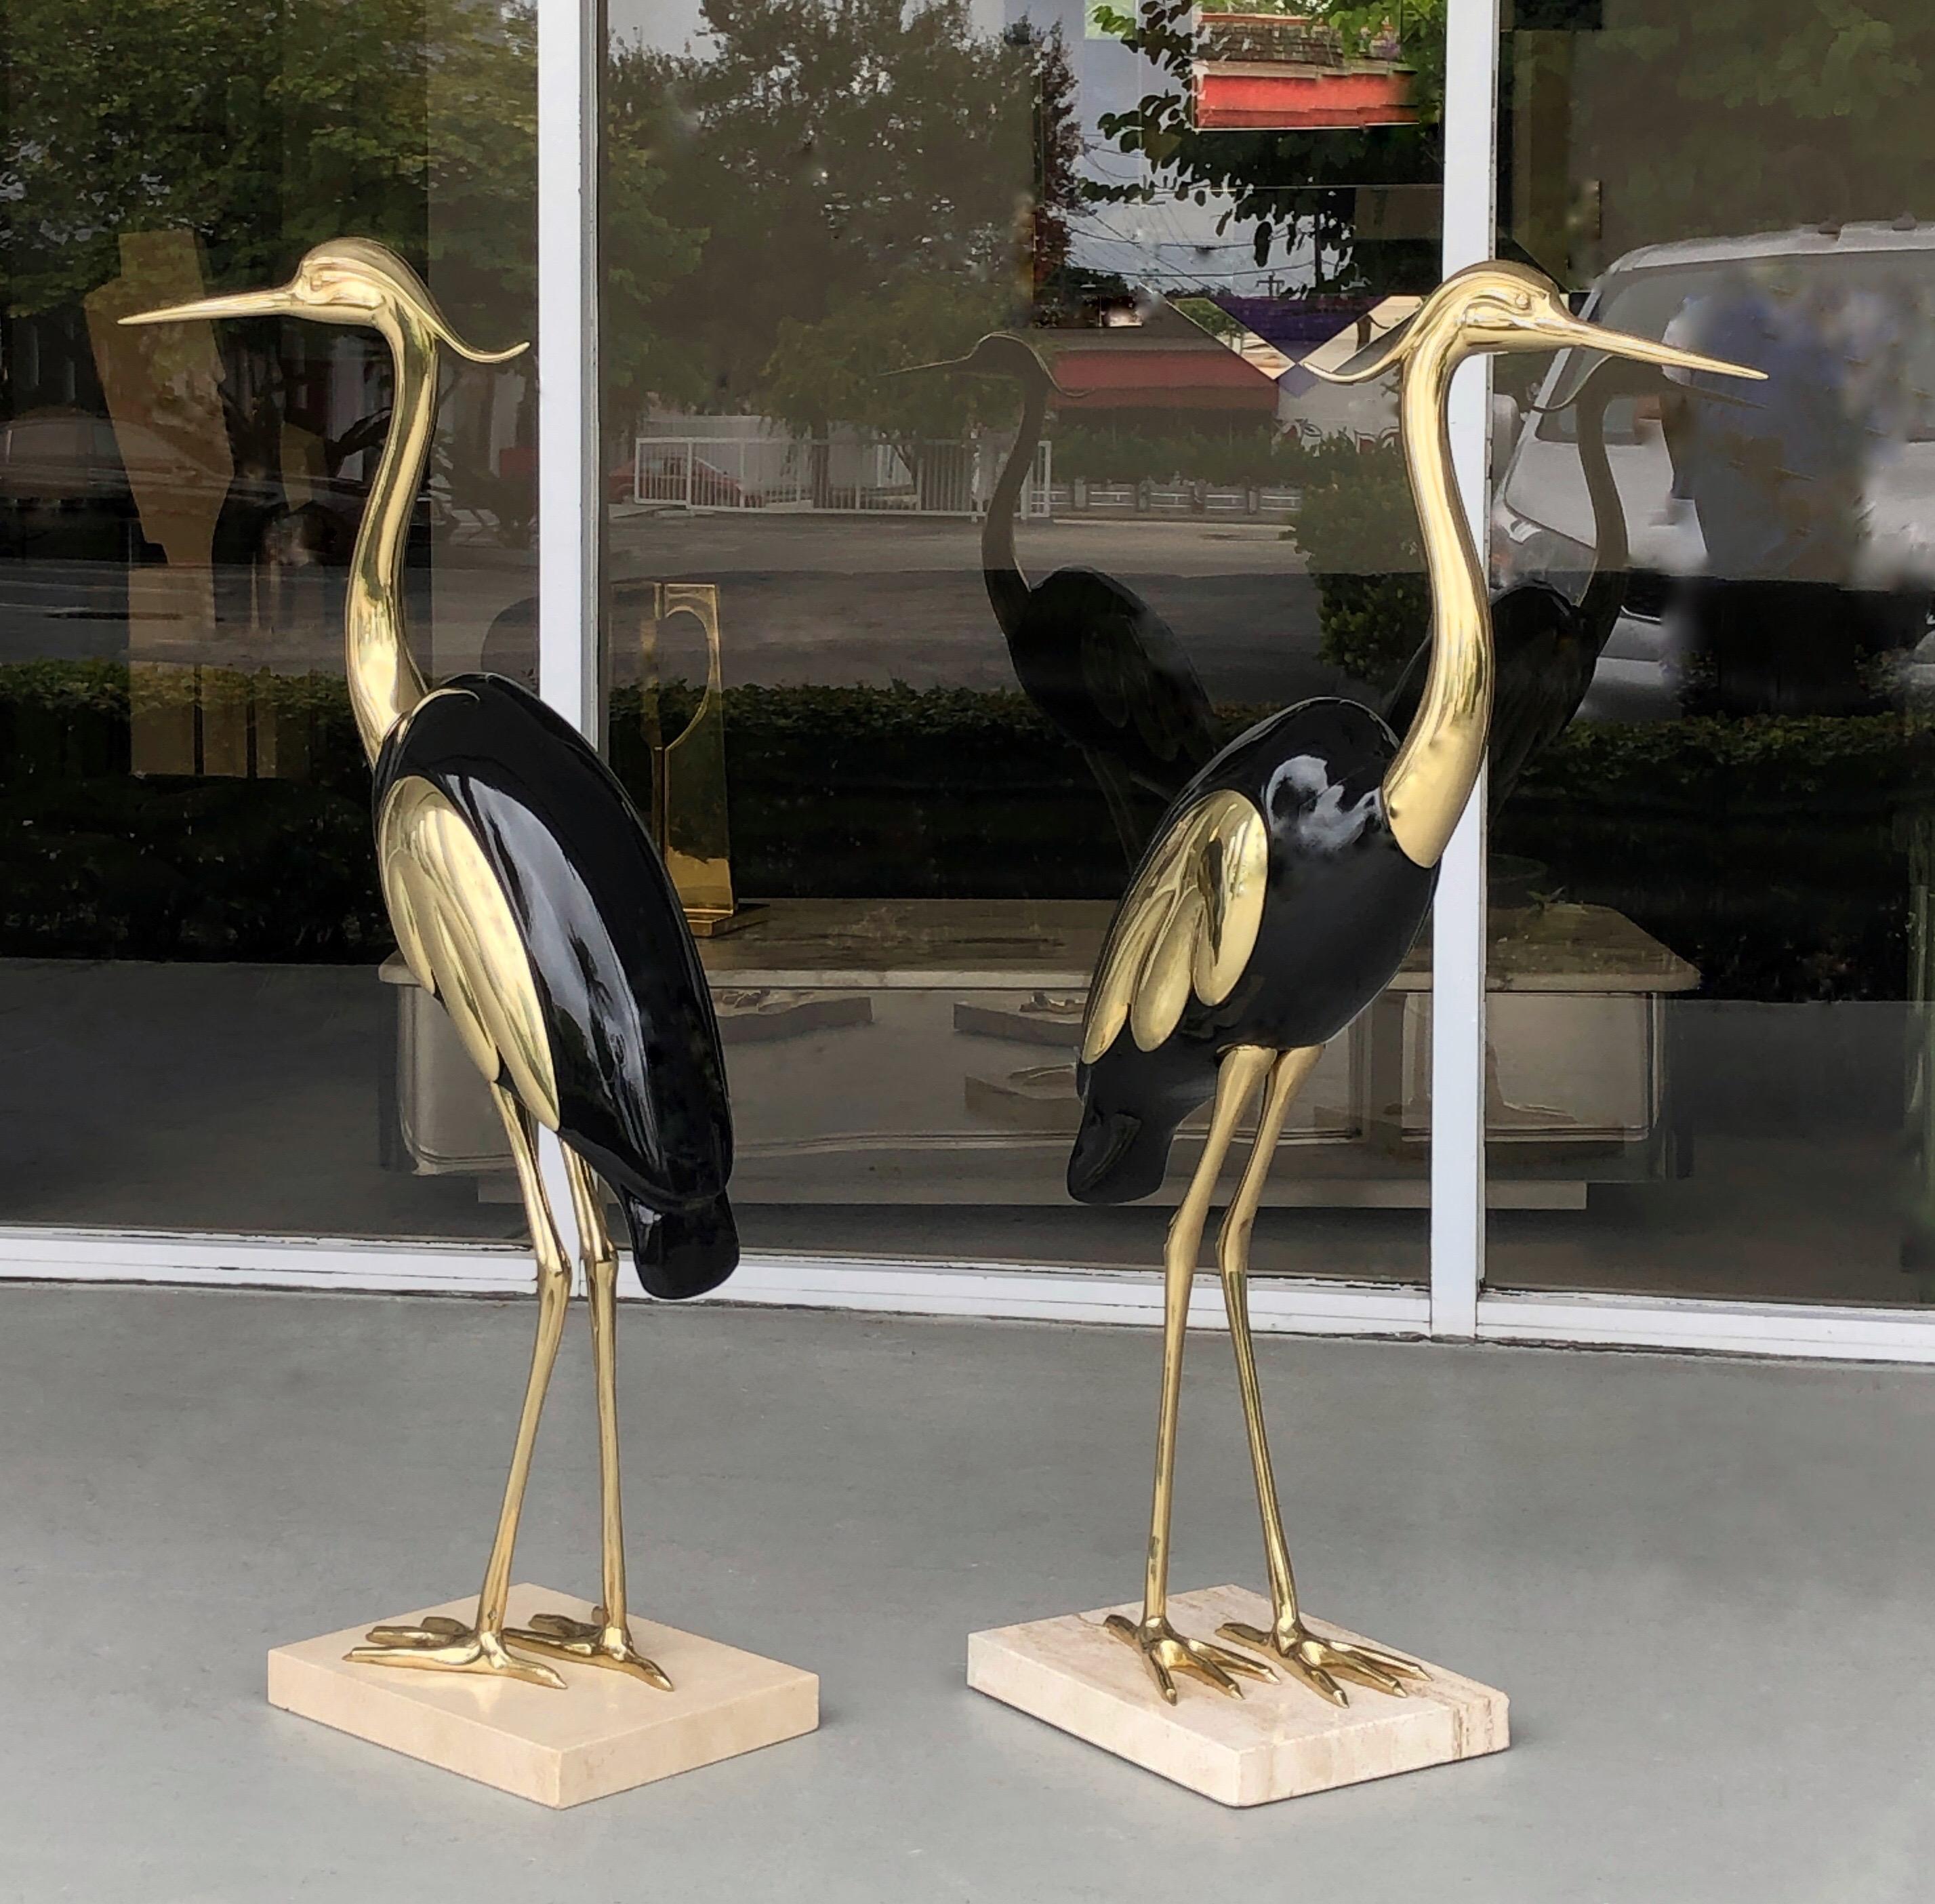 A pair of brass and lacquer bird sculptures, Italy, 1970s. Both on marble bases.